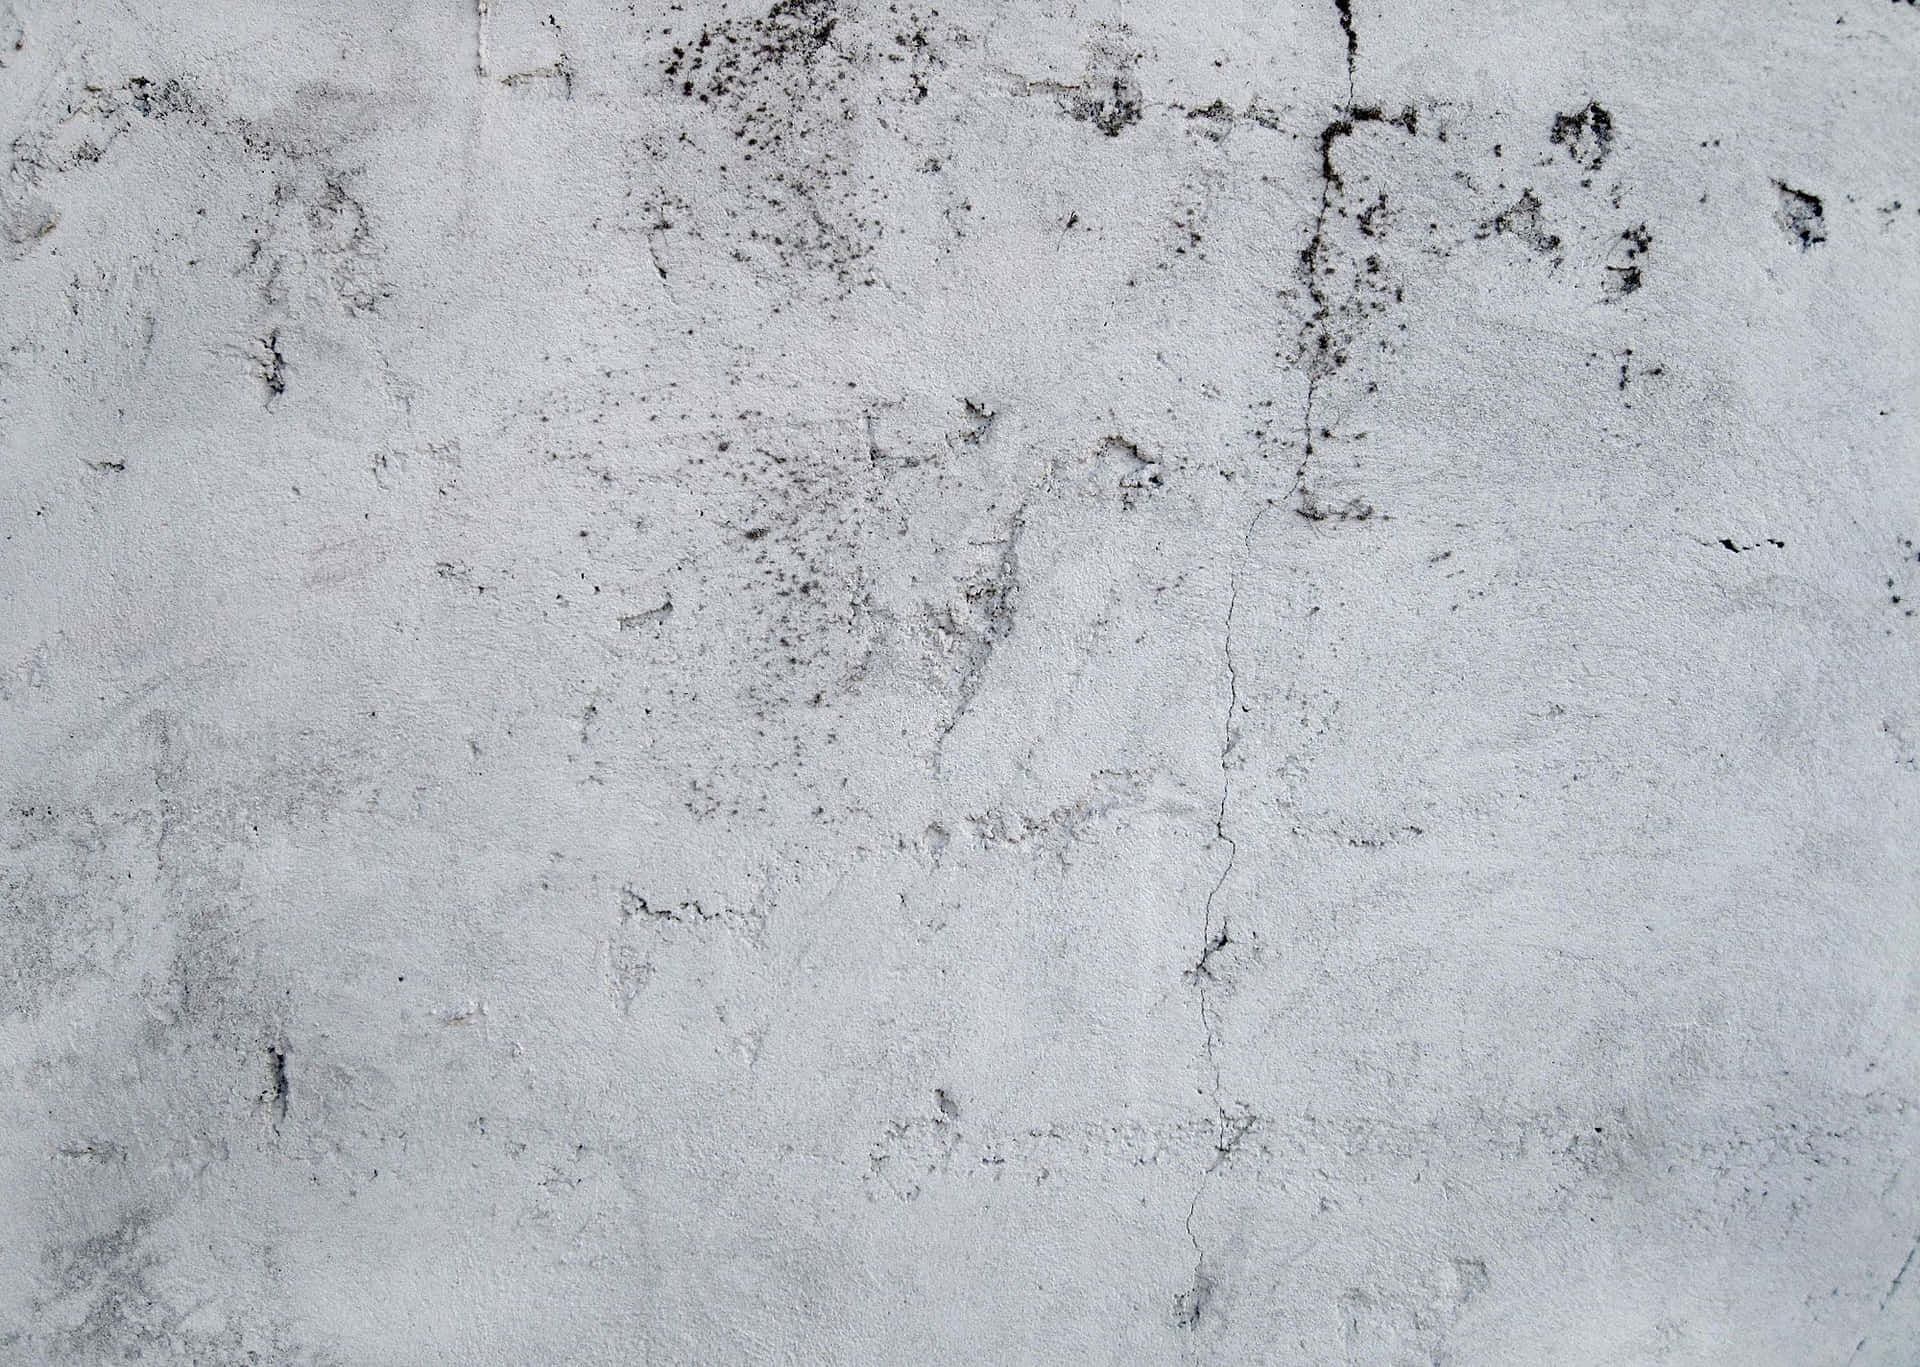 A texture of white grunge in abstract form.